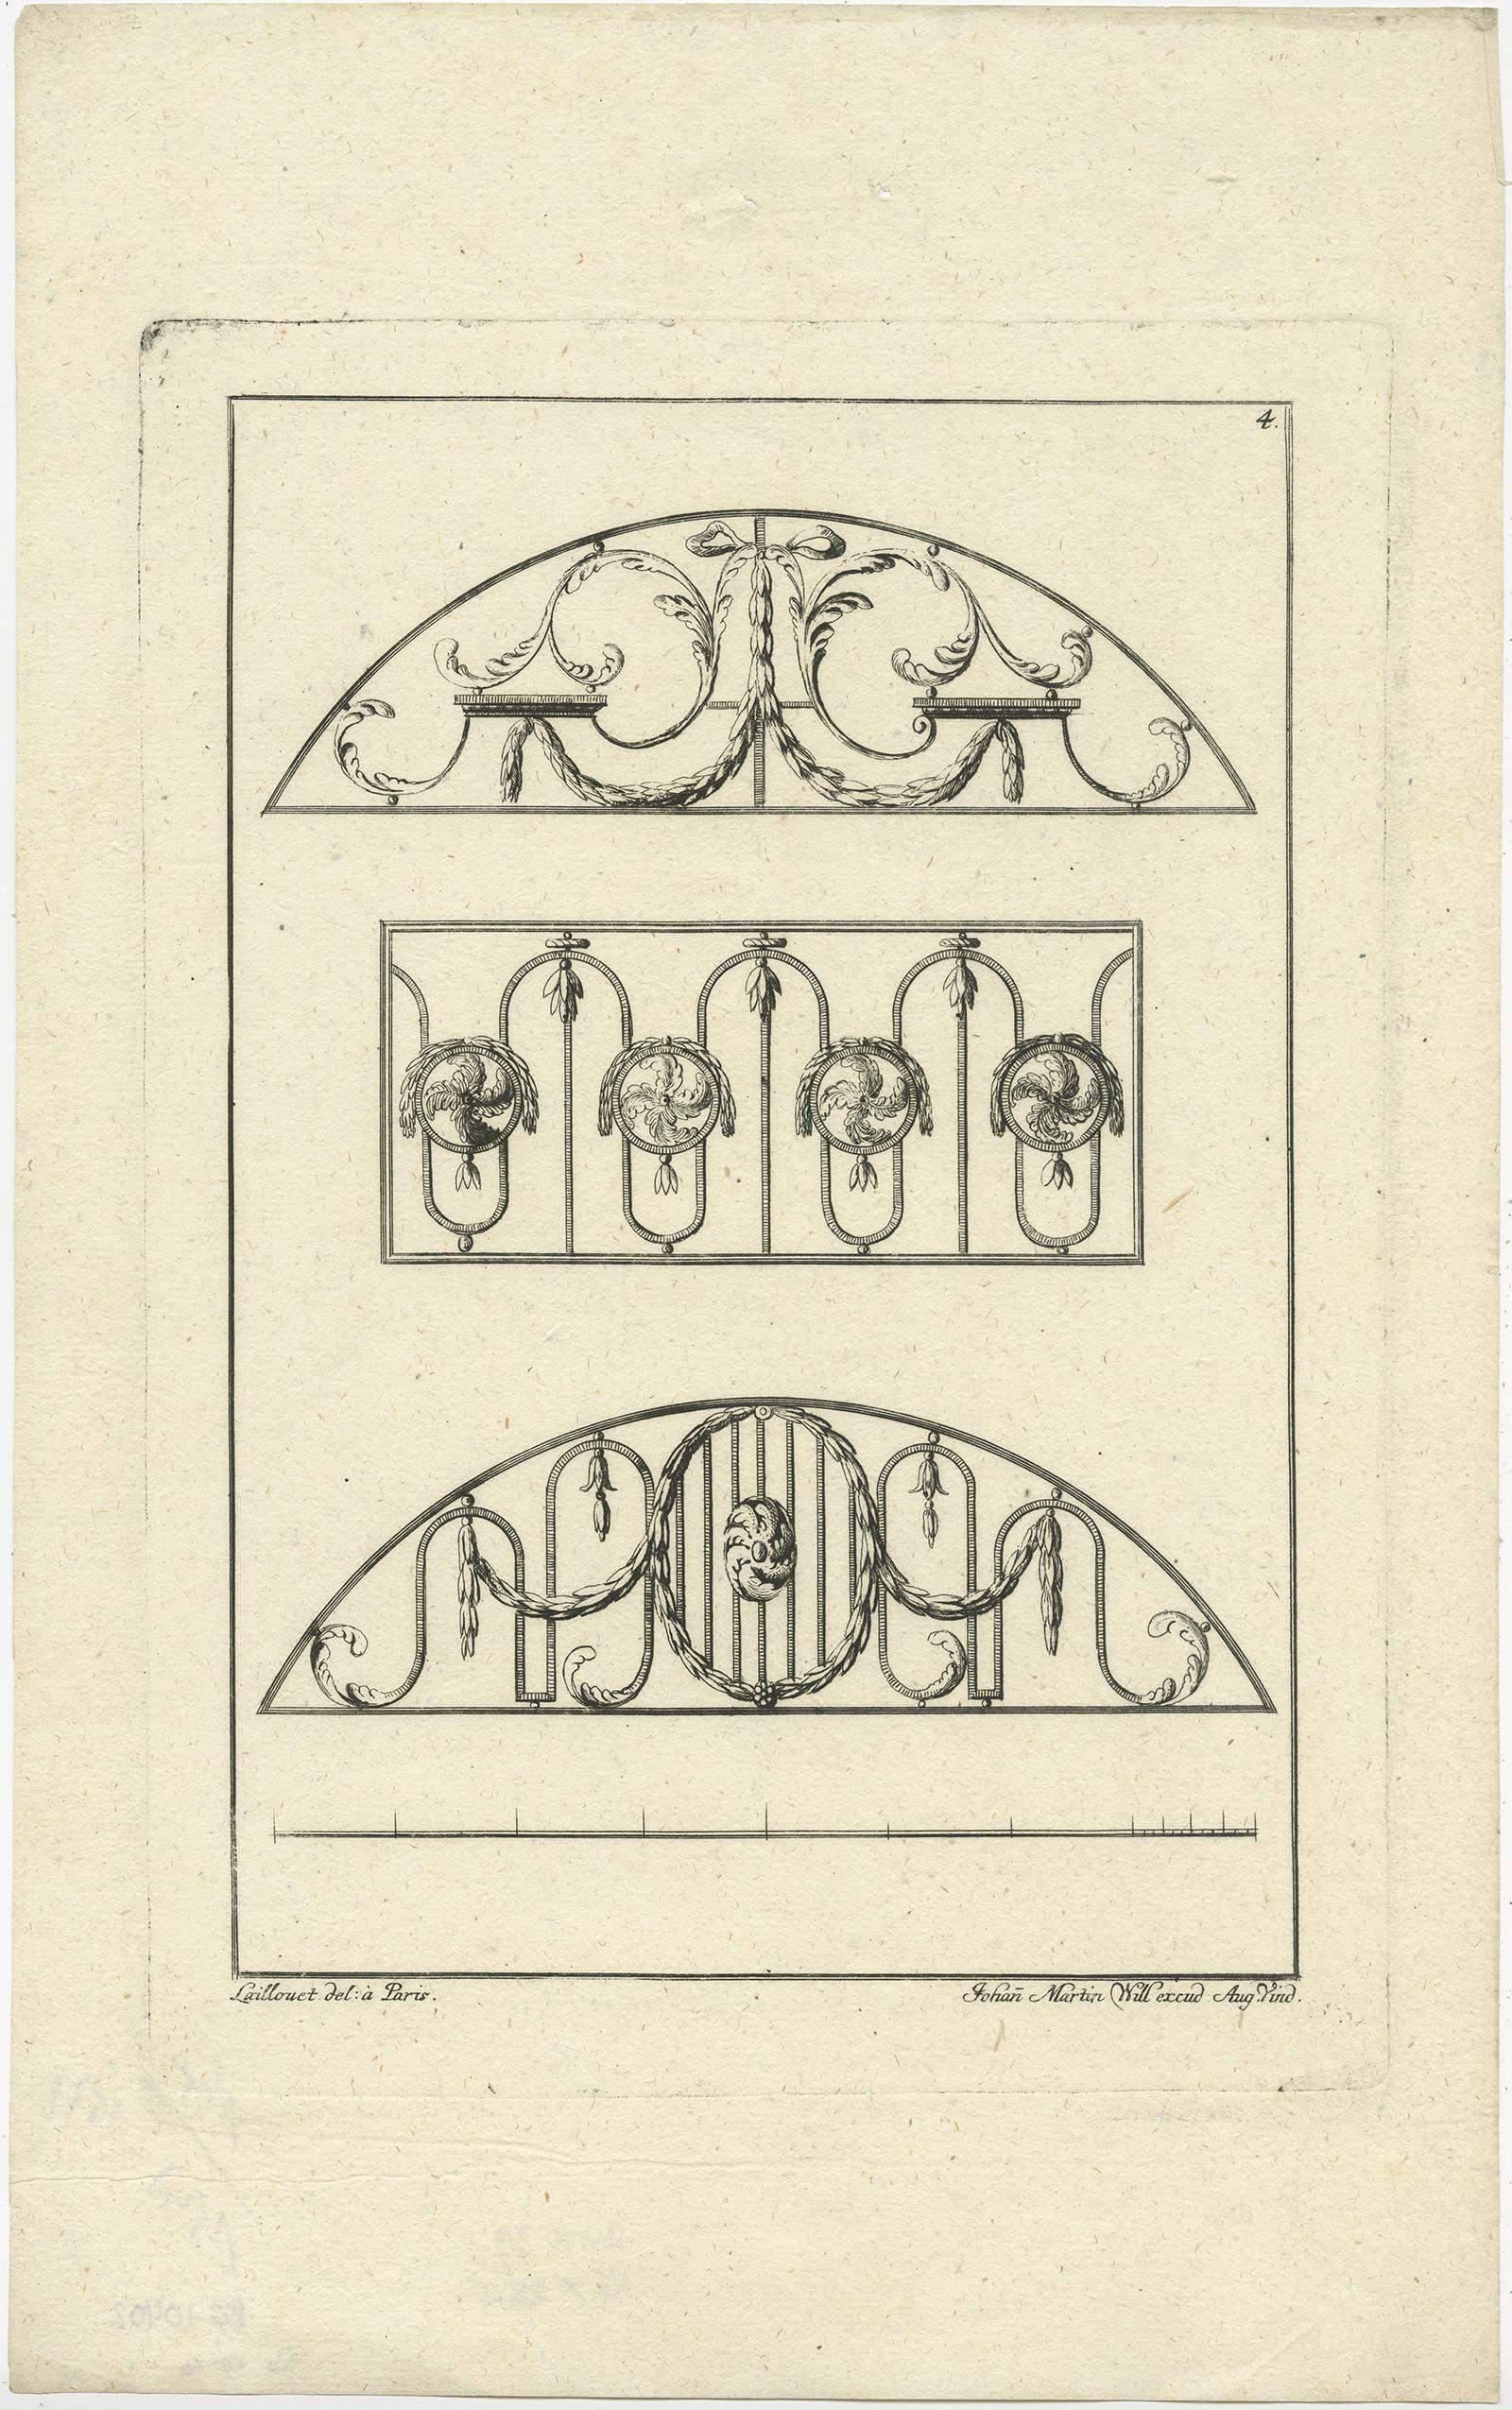 Set of four untitled prints depicting various building ornaments. Signed by Johann Martin Will. Source unknown, to be determined.